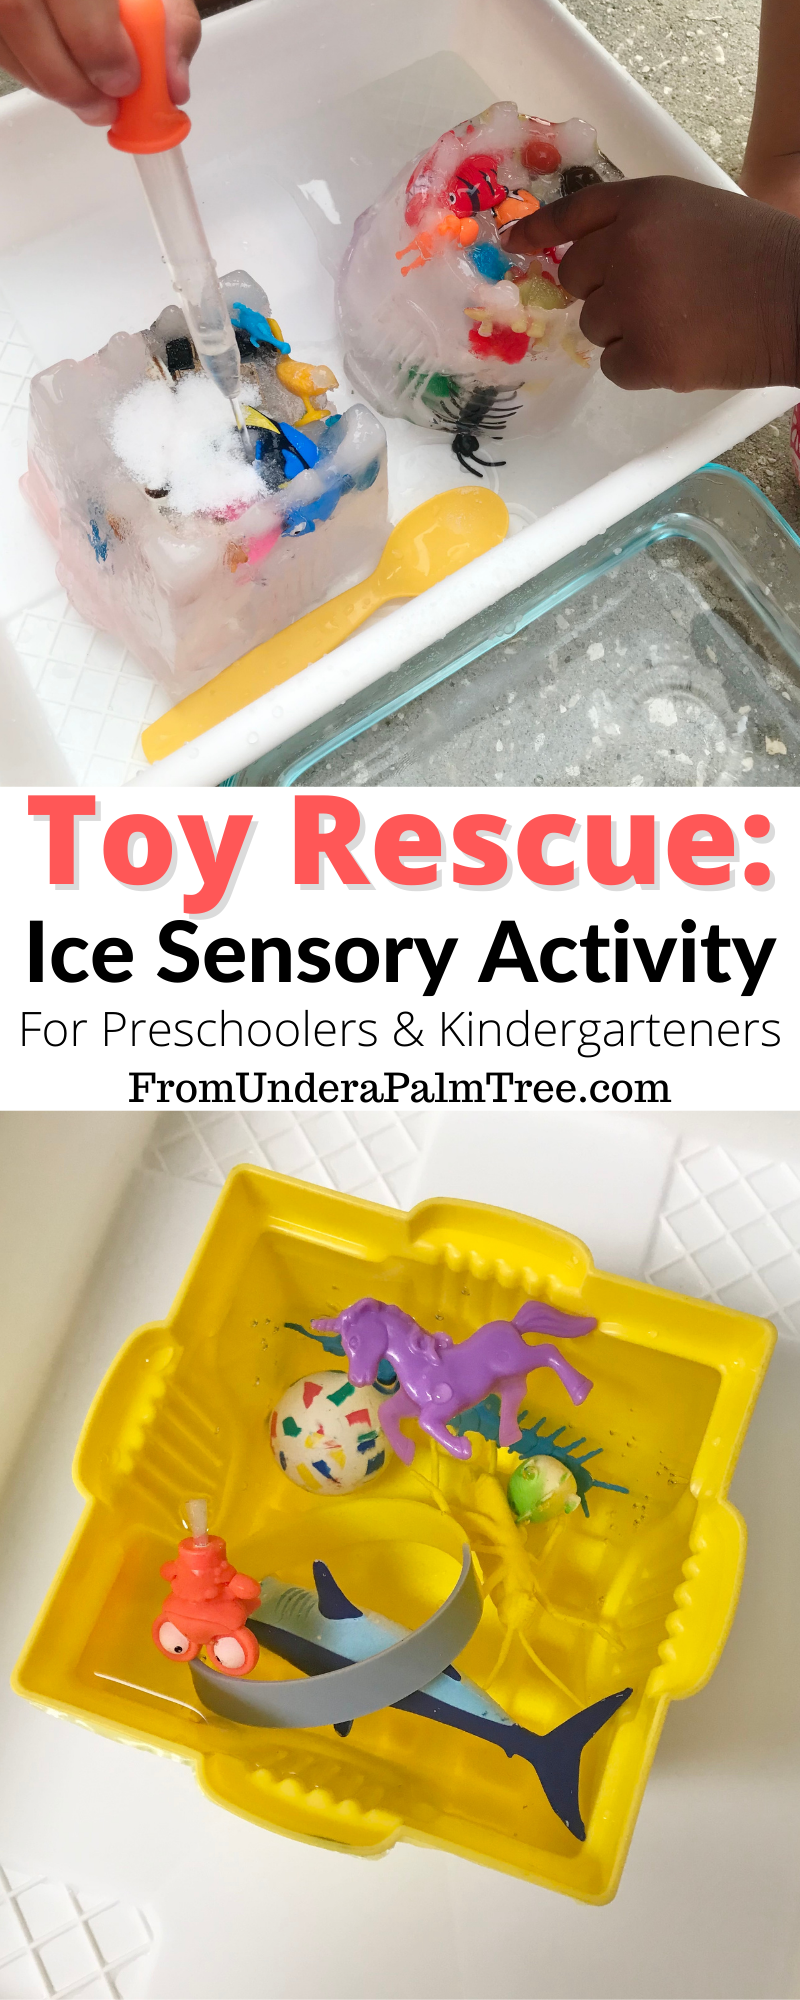 ice activity for kids | ice activity | ice rescue activity | toy rescue ice activity | ice sensory activity for kids | ice sensory activity | melting ice activity | kids outdoor activity | kids activity | preschool sensory activity | kindergarten sensory activity | sensory activities for kids | sensory play | animal ice sensory activity | preschool learning | preschool learning ideas | preschool lesson plans | kindergarten lesson plans | 